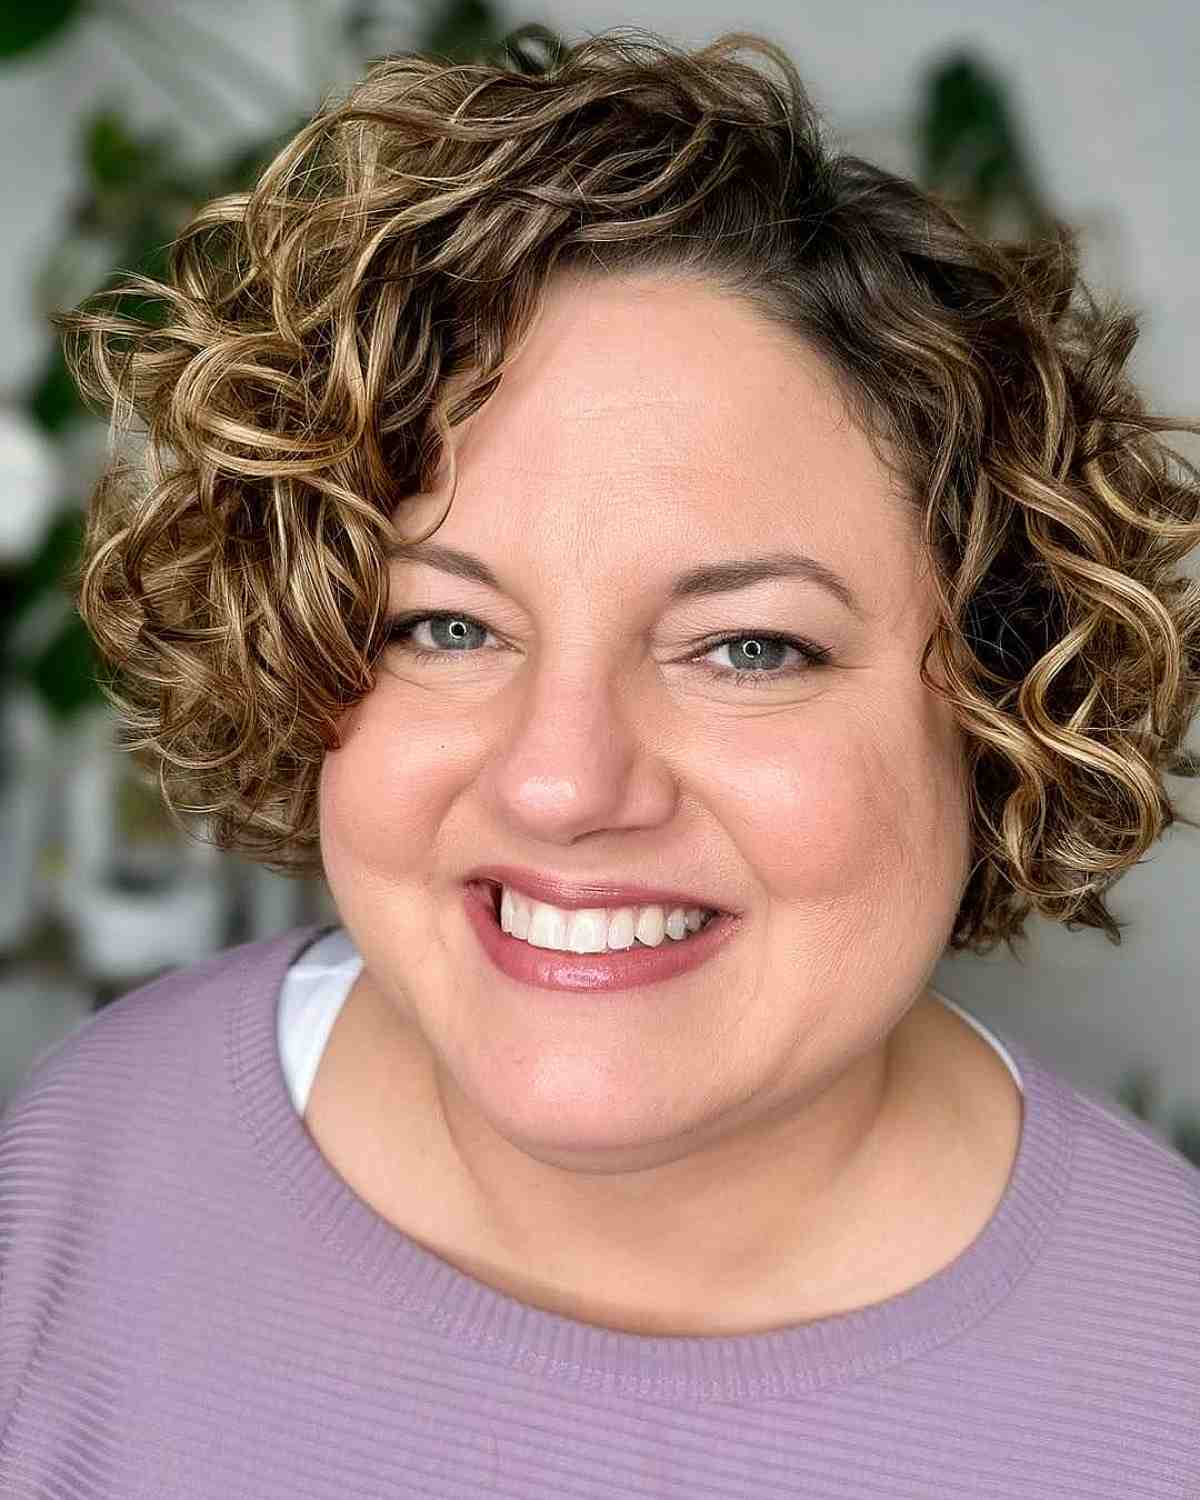 Short Side-Parted Curls for Women with Round Faces 